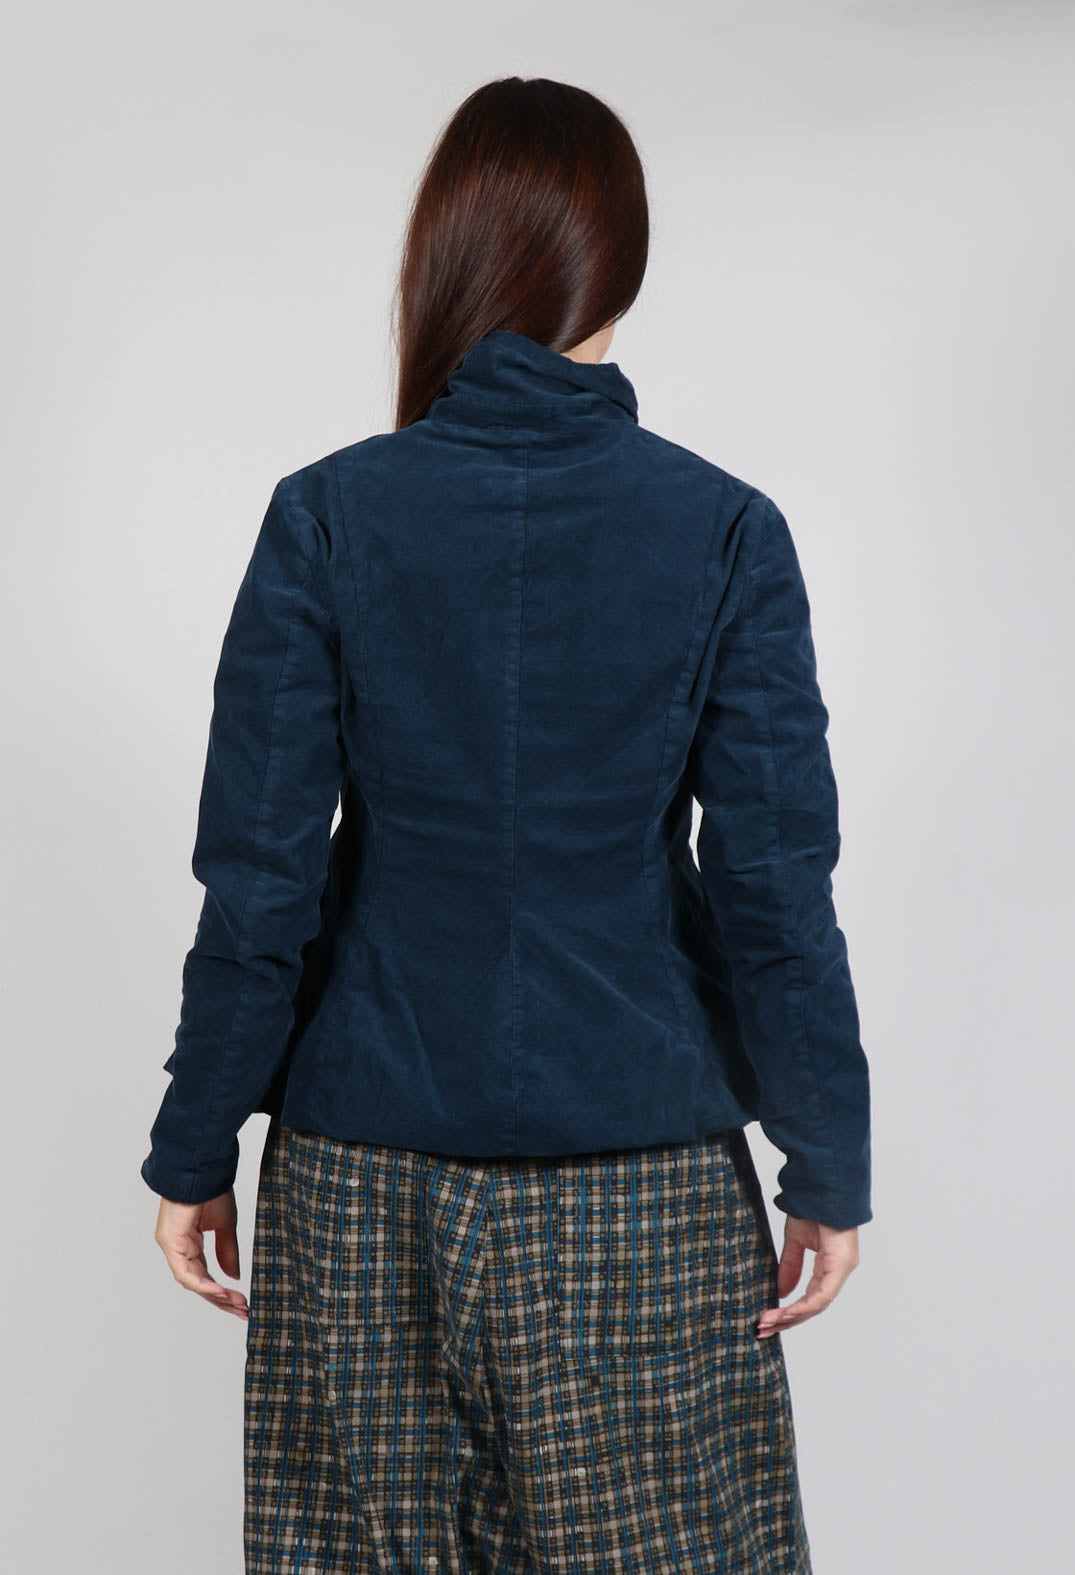 Fitted Jacket with Tulip Hem in Ink